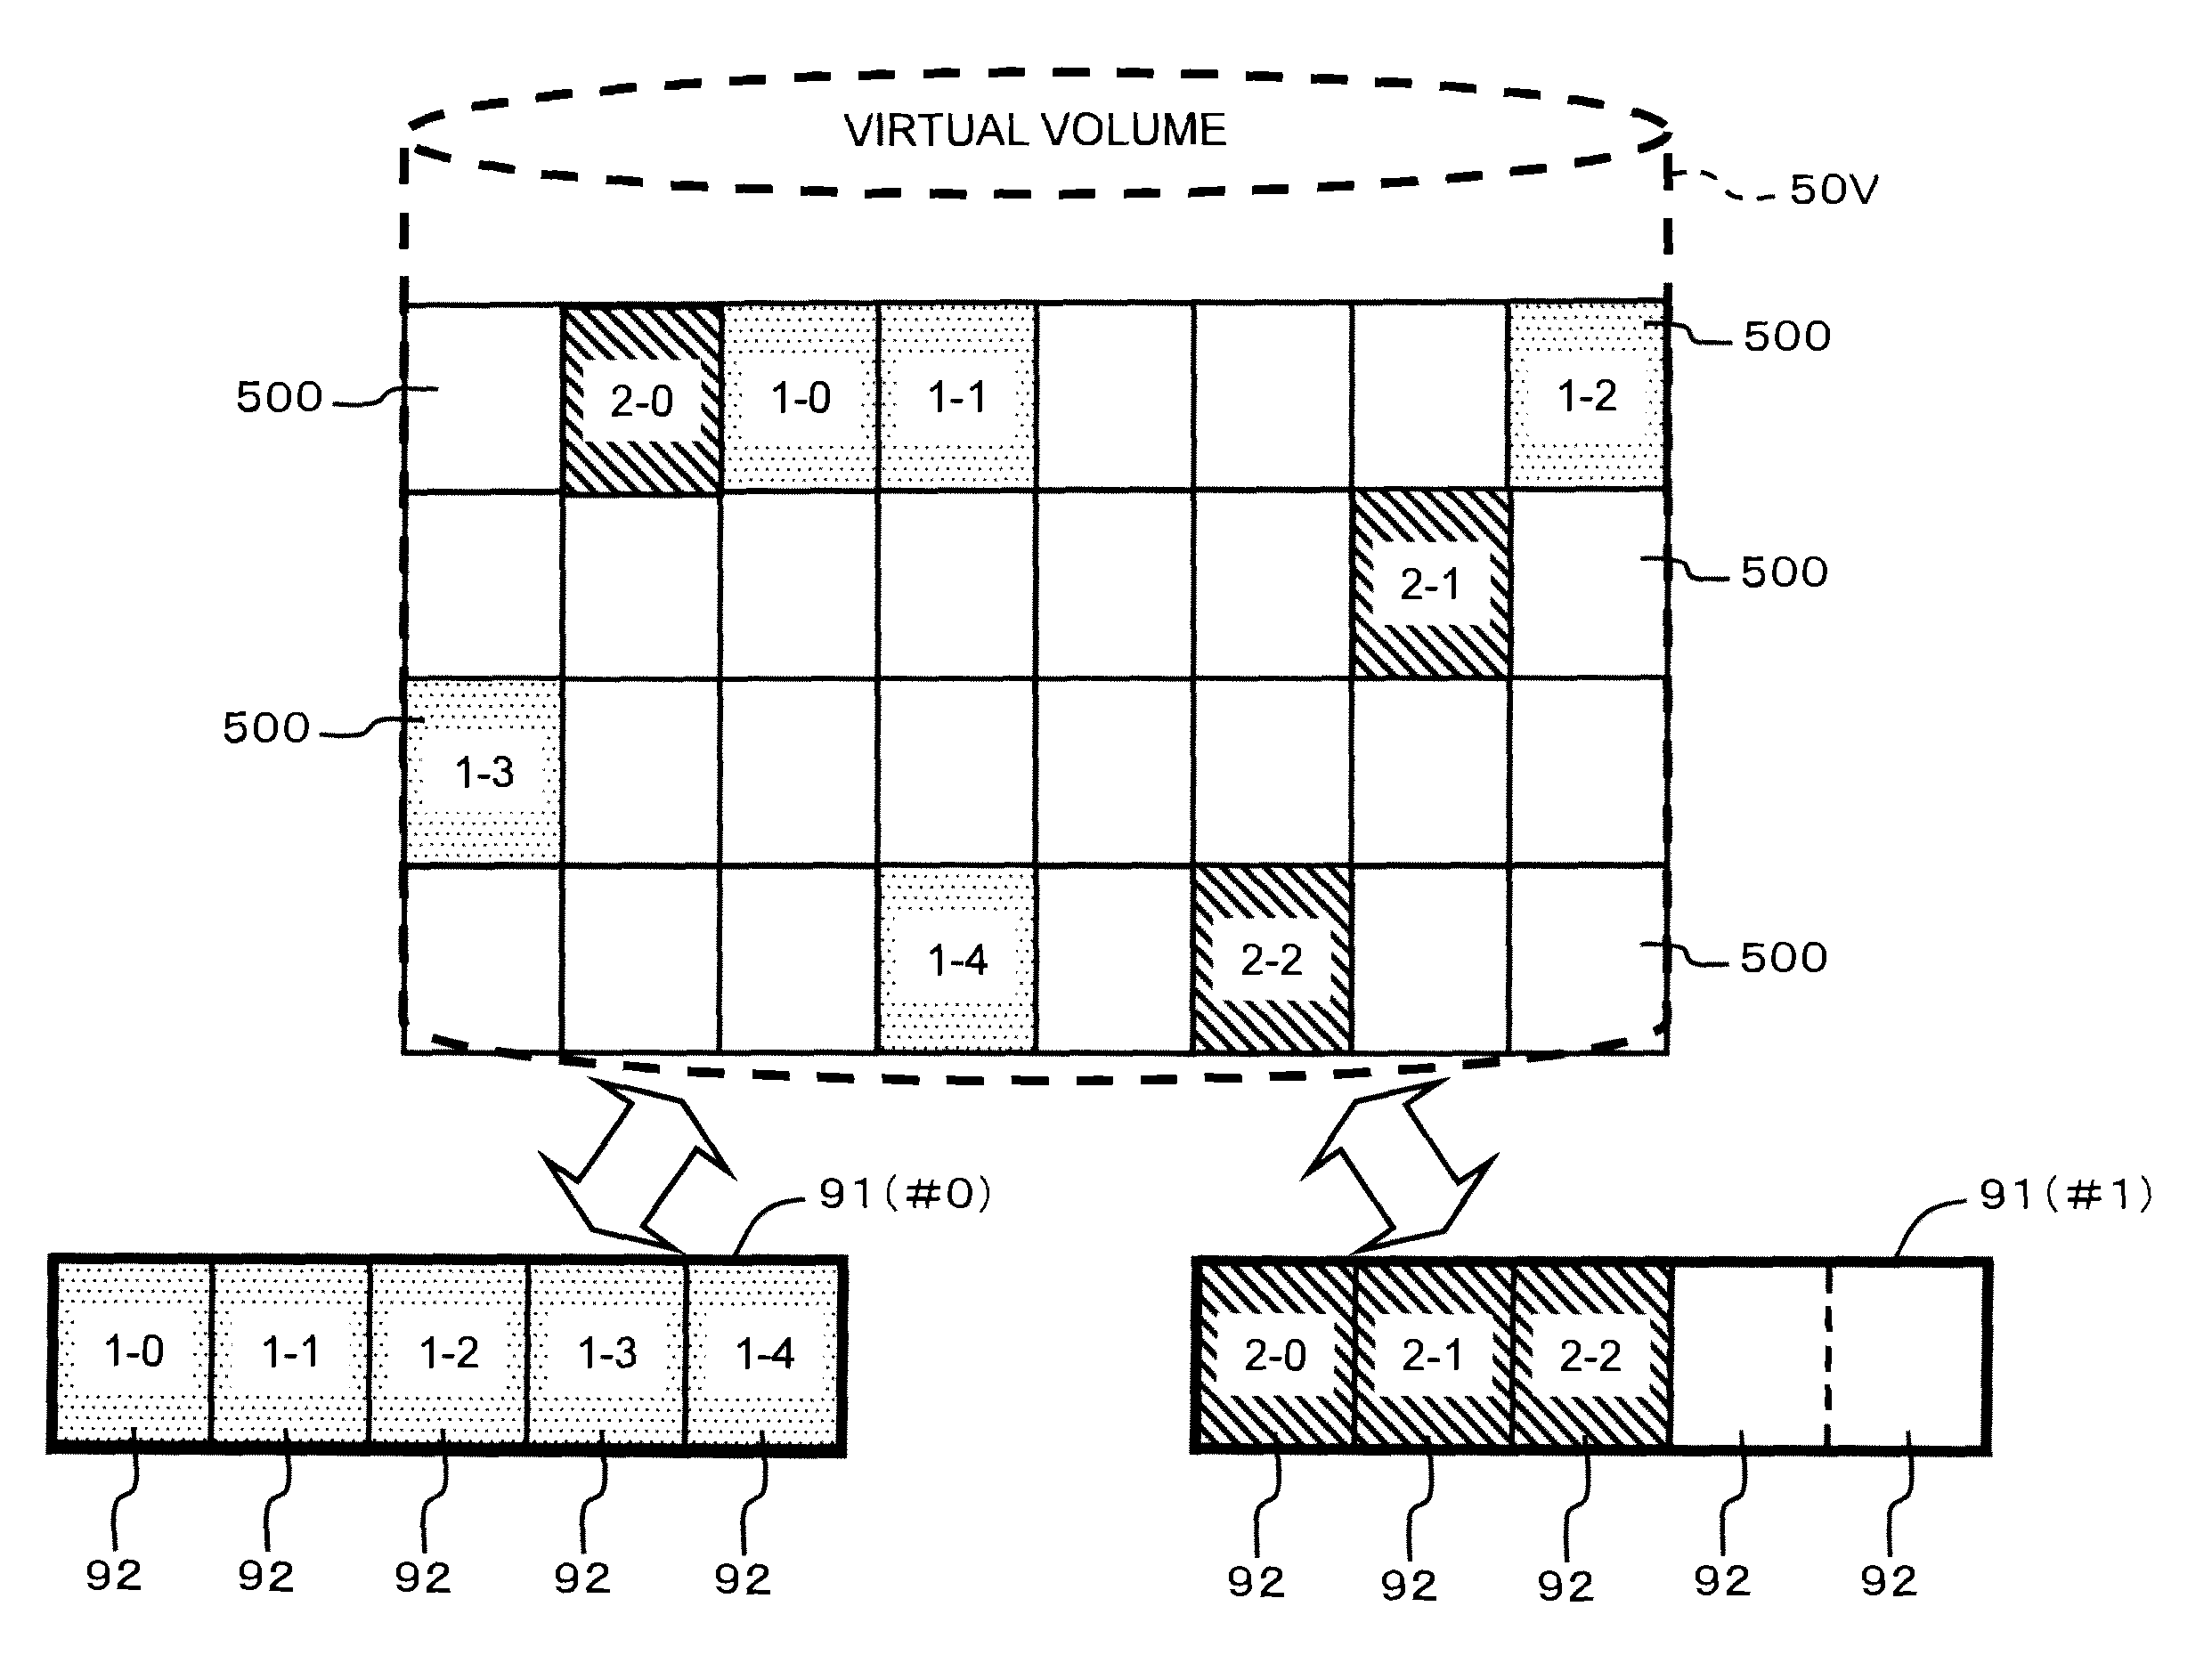 Allocation and release of storage areas to virtual volumes